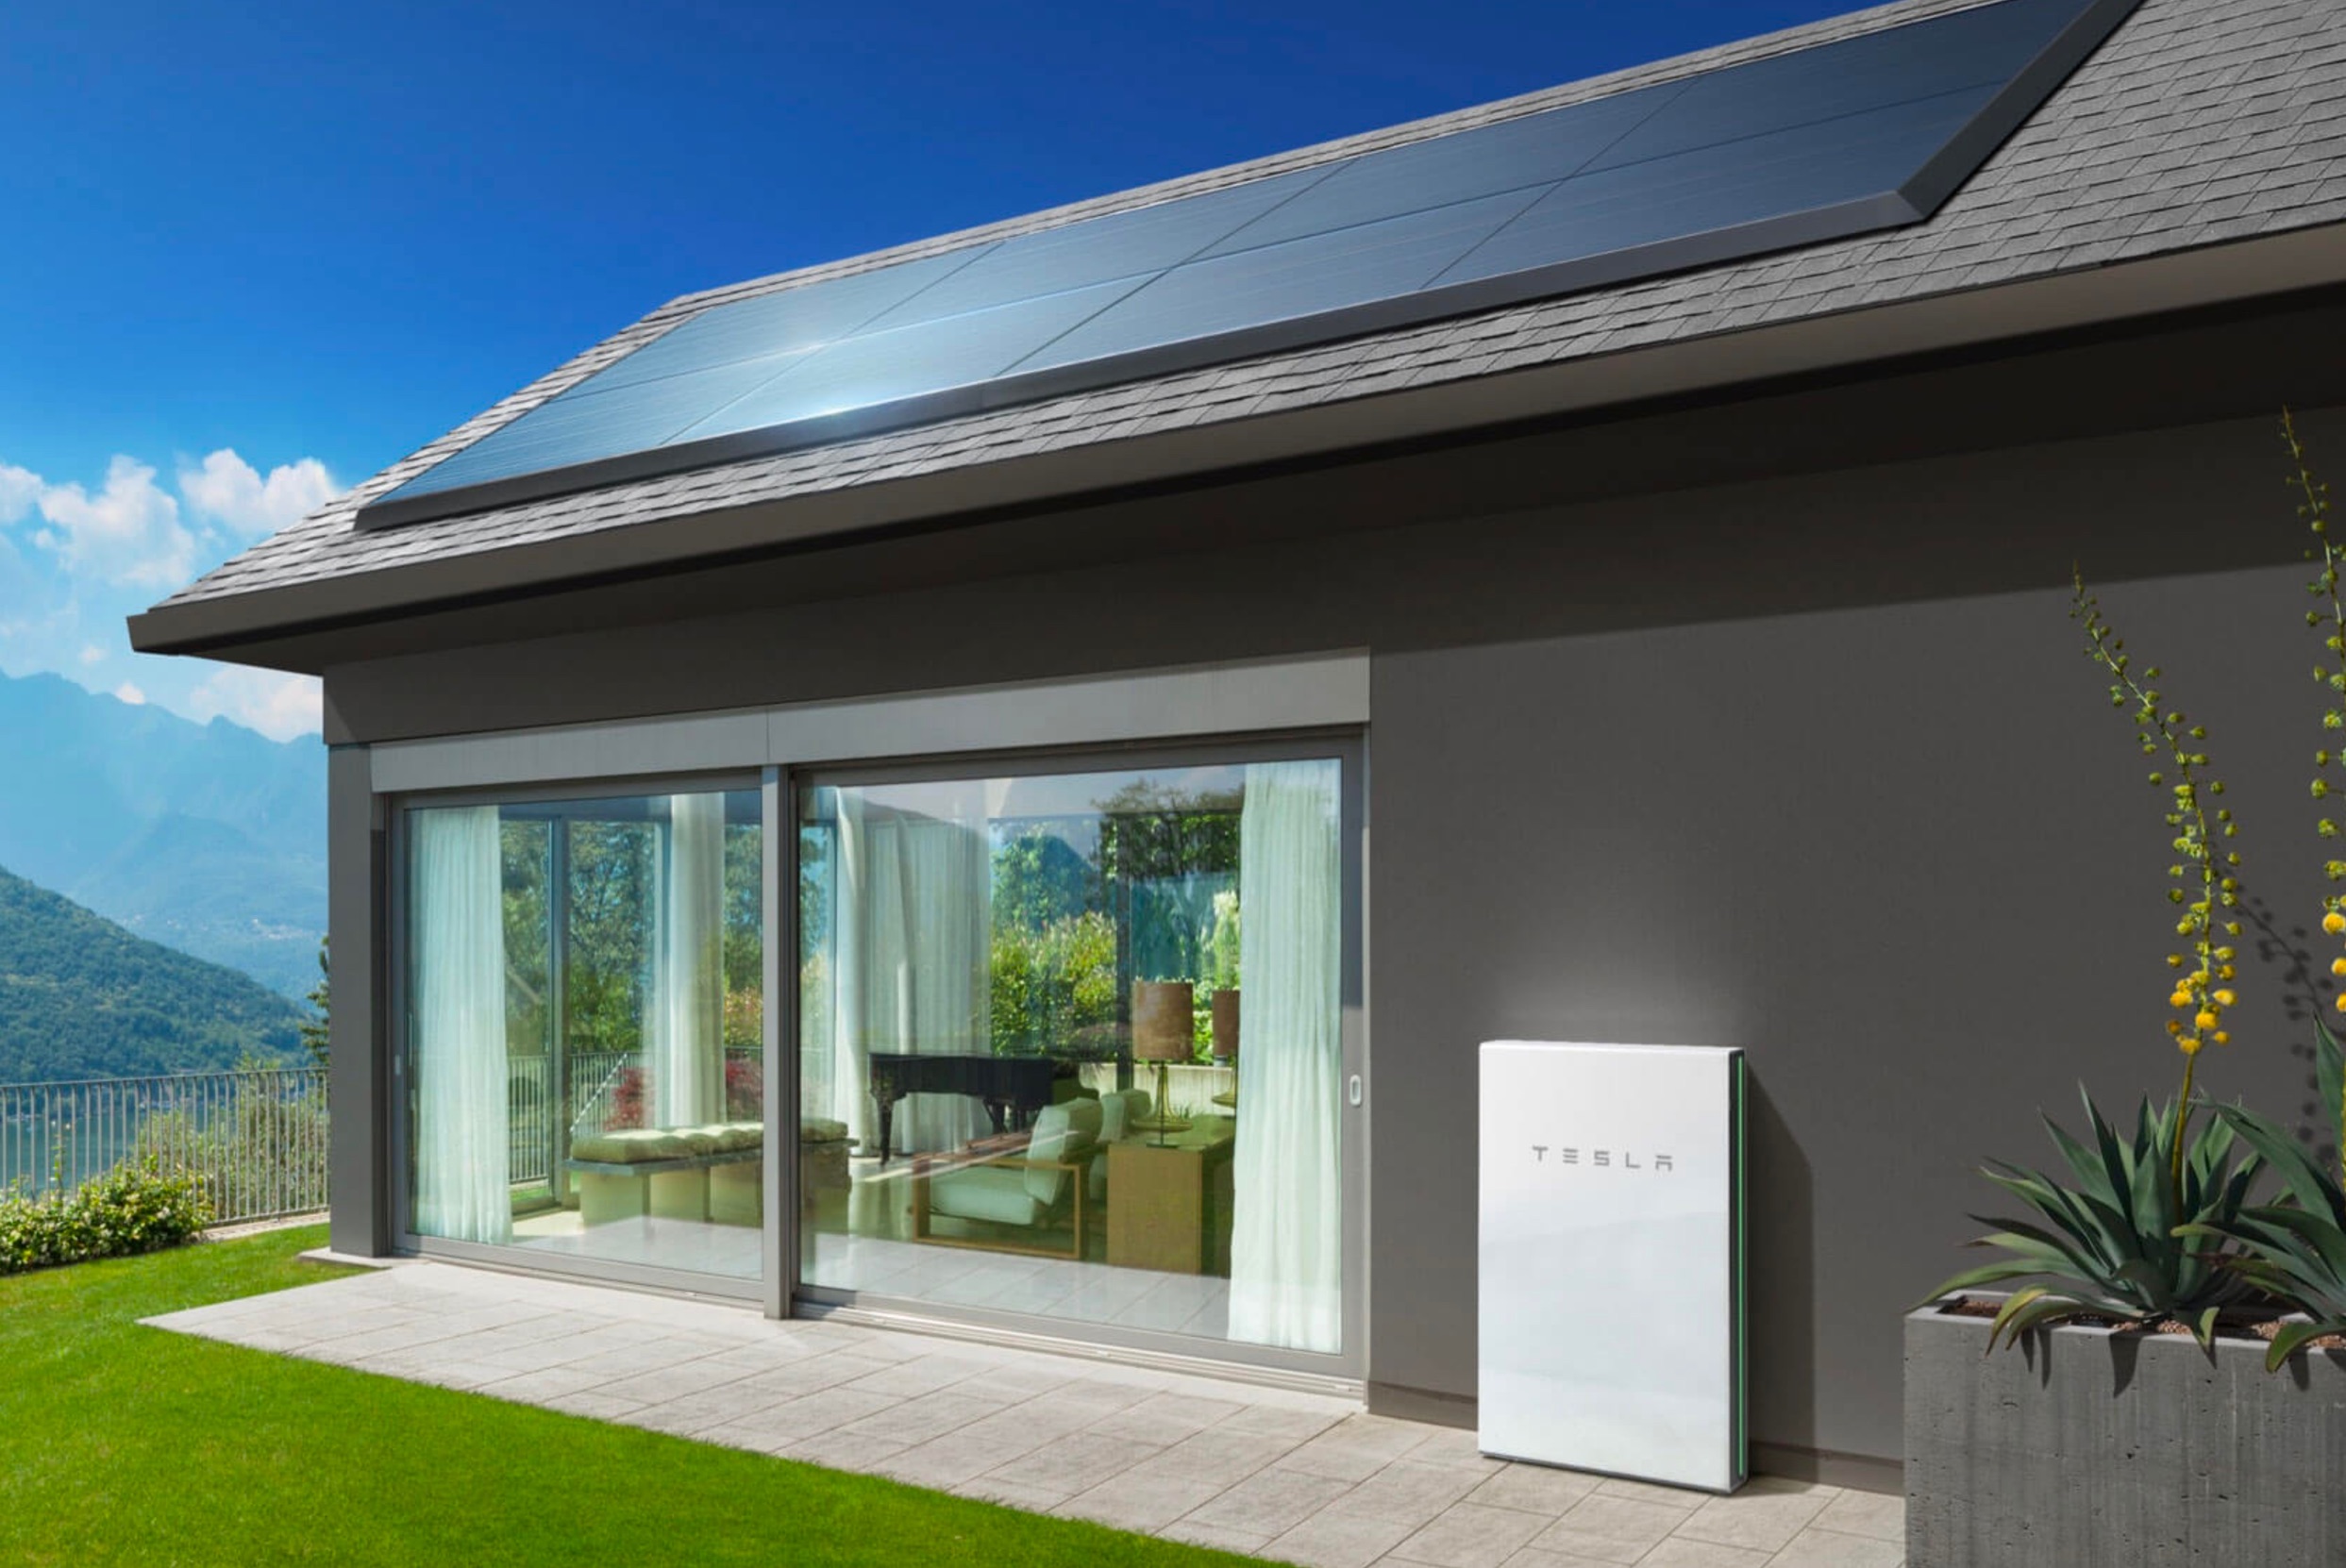 Tesla's new lowprofile solar panels blend seamlessly into a rooftop